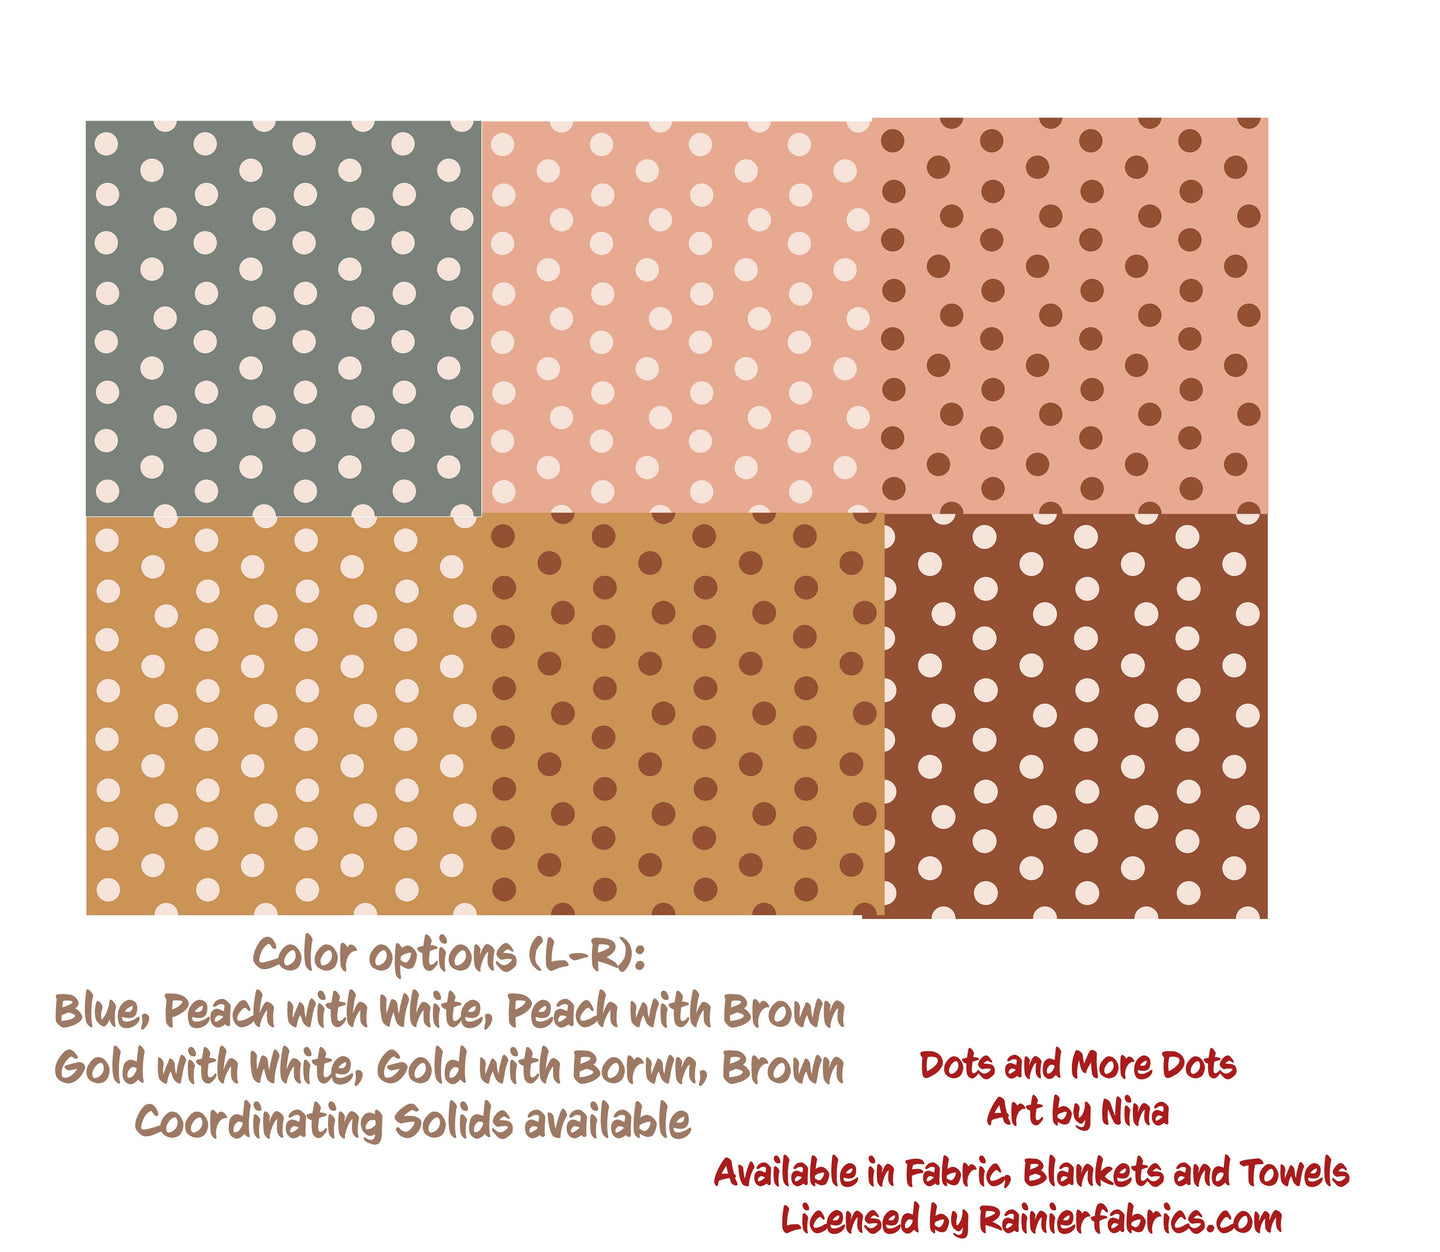 Boho-Chic Collection ~ Coordinating Dots from Nina  - 2-5 day turnaround - Order by 1/2 yard; Description of bases below